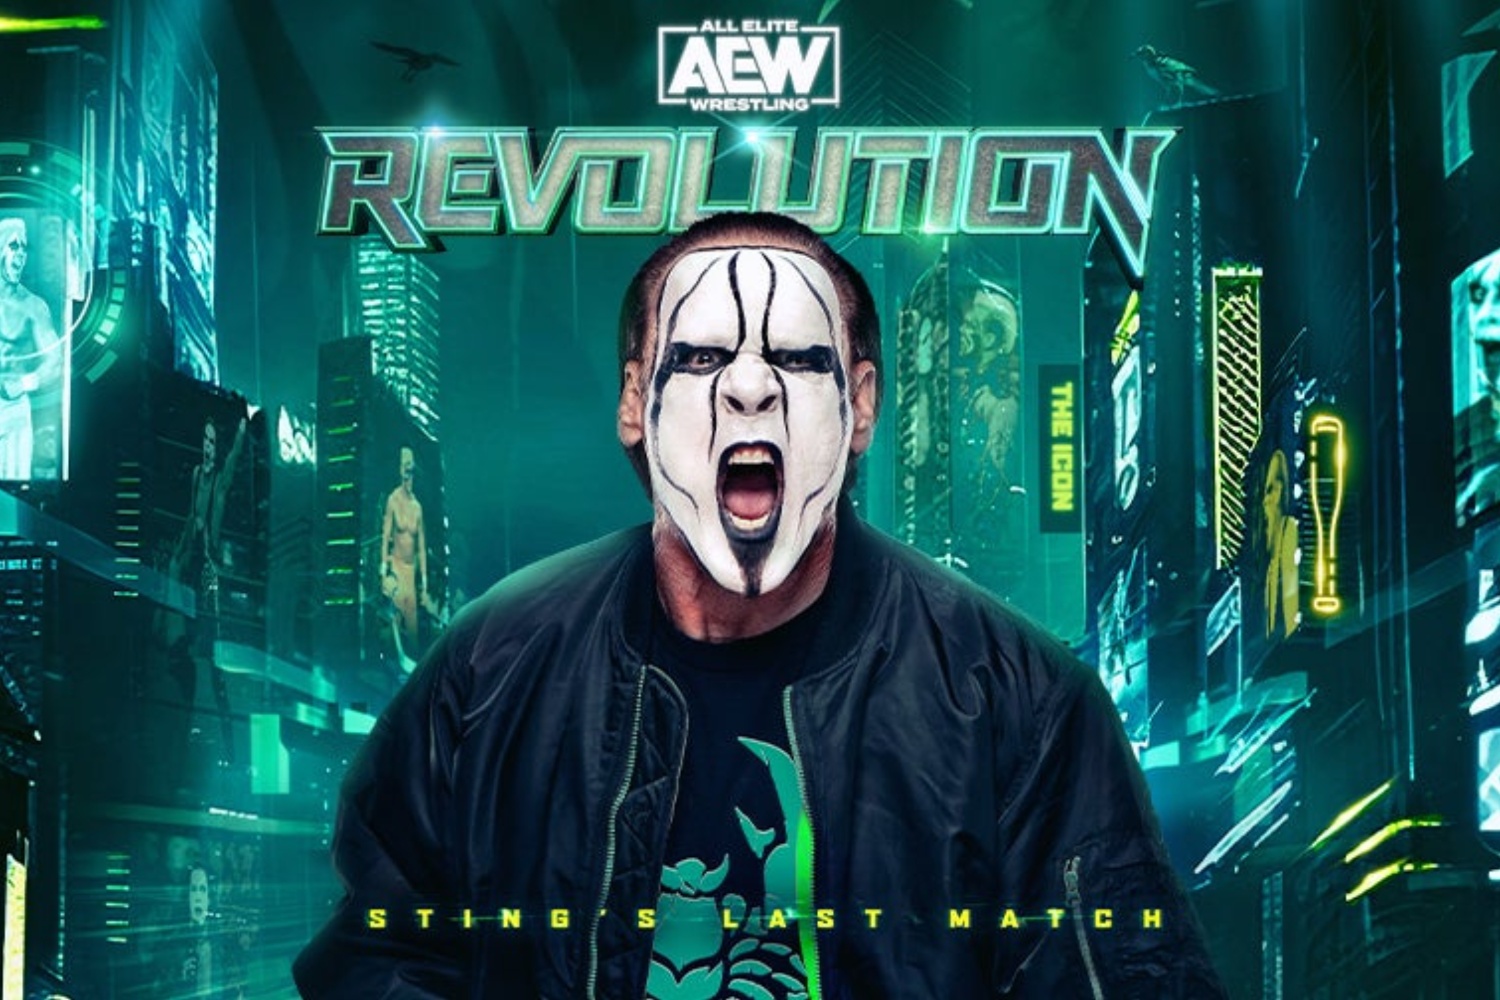 Sting screams with his mouth open on the poster for AEW Revolution.